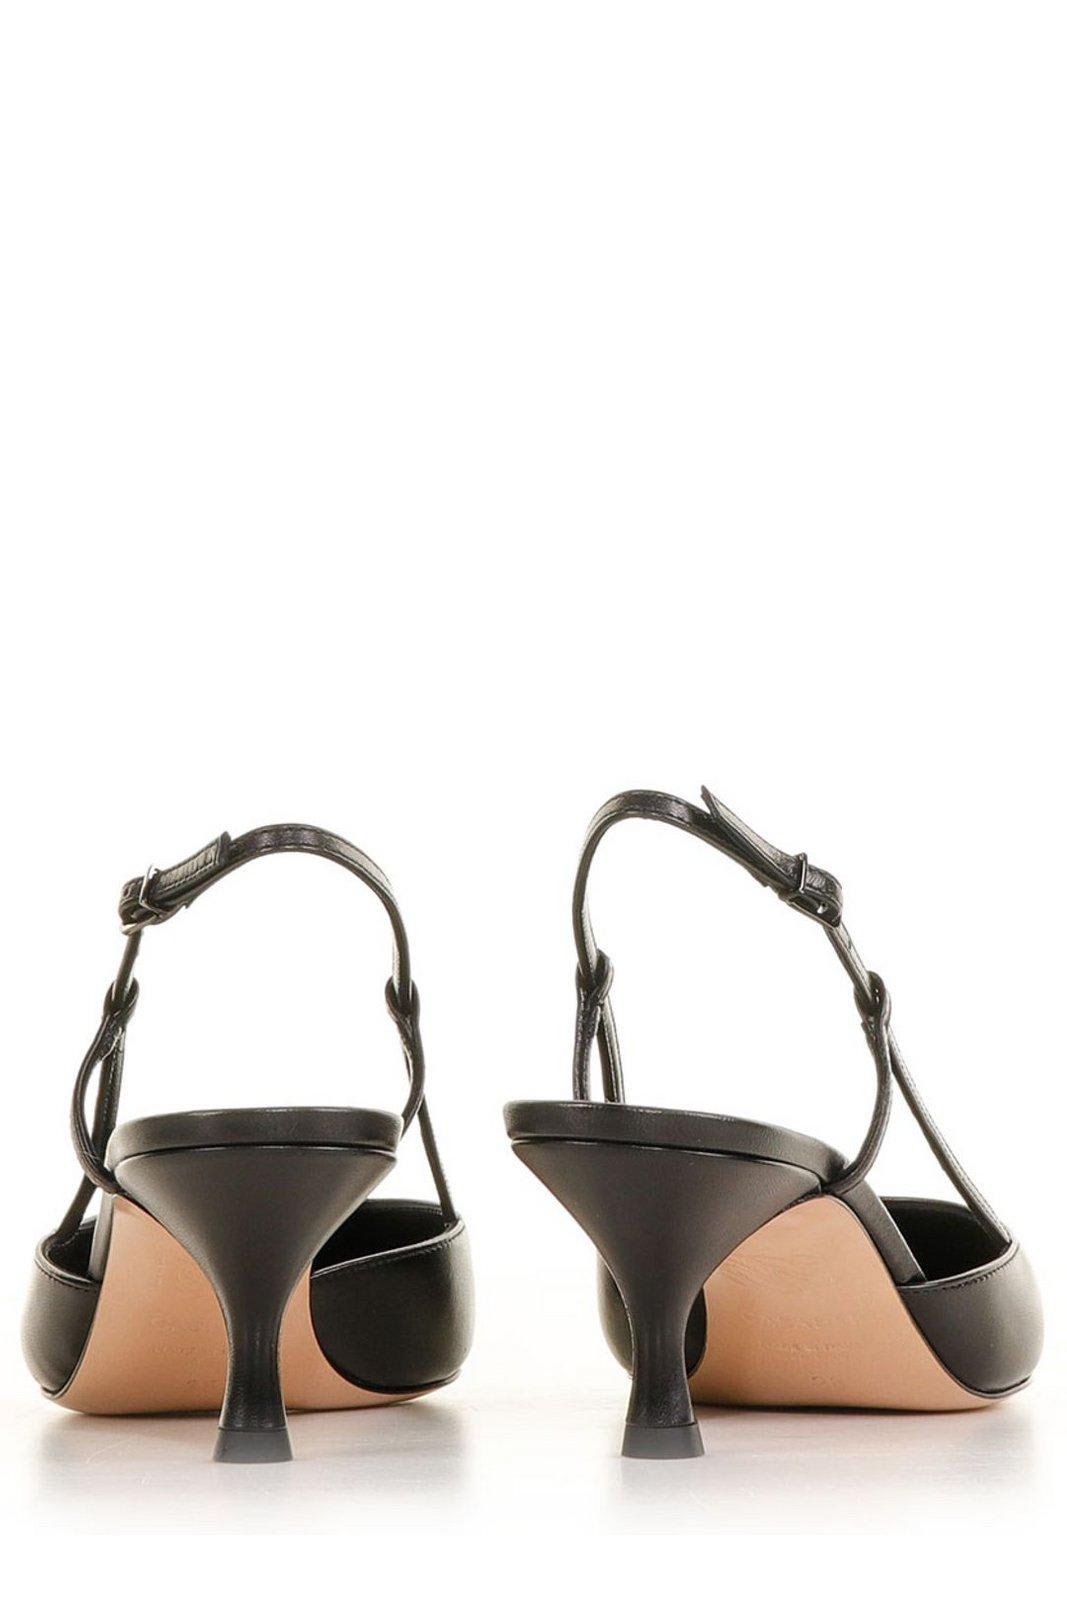 Shop Casadei Pointed-toe Slingback Pumps In Black